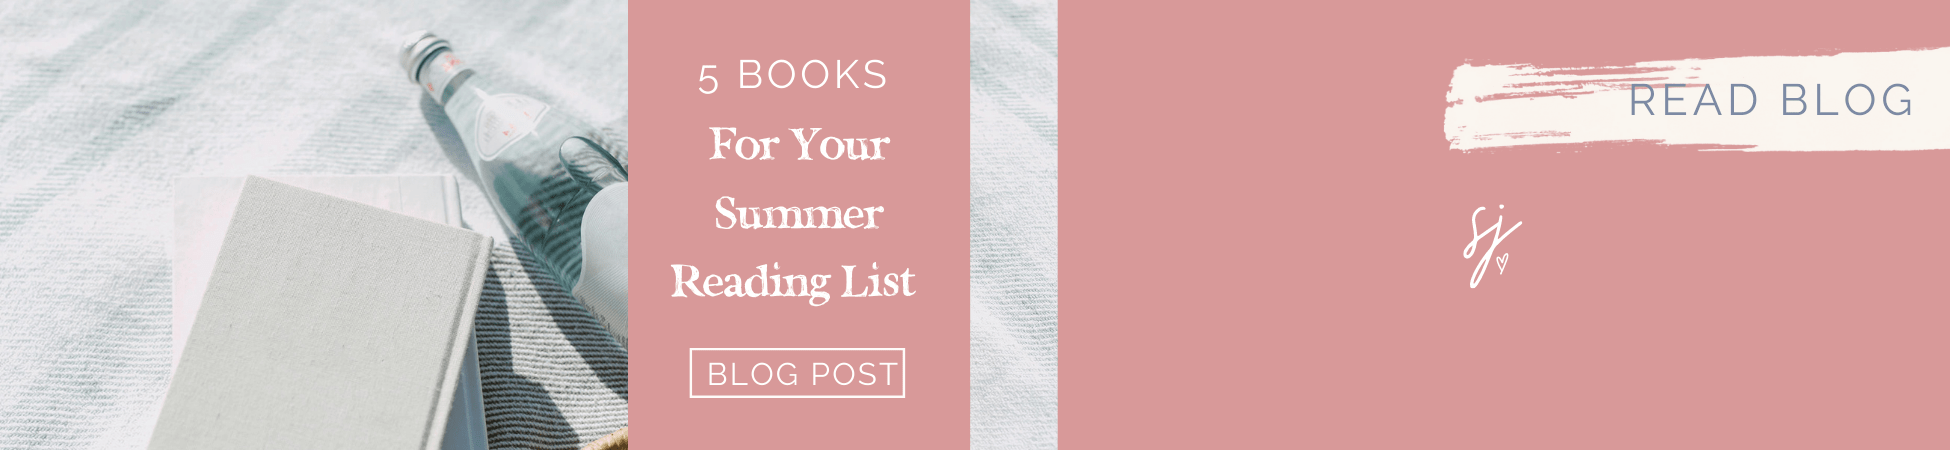 Stephanie Jacobs | 5 books for your summer reading list